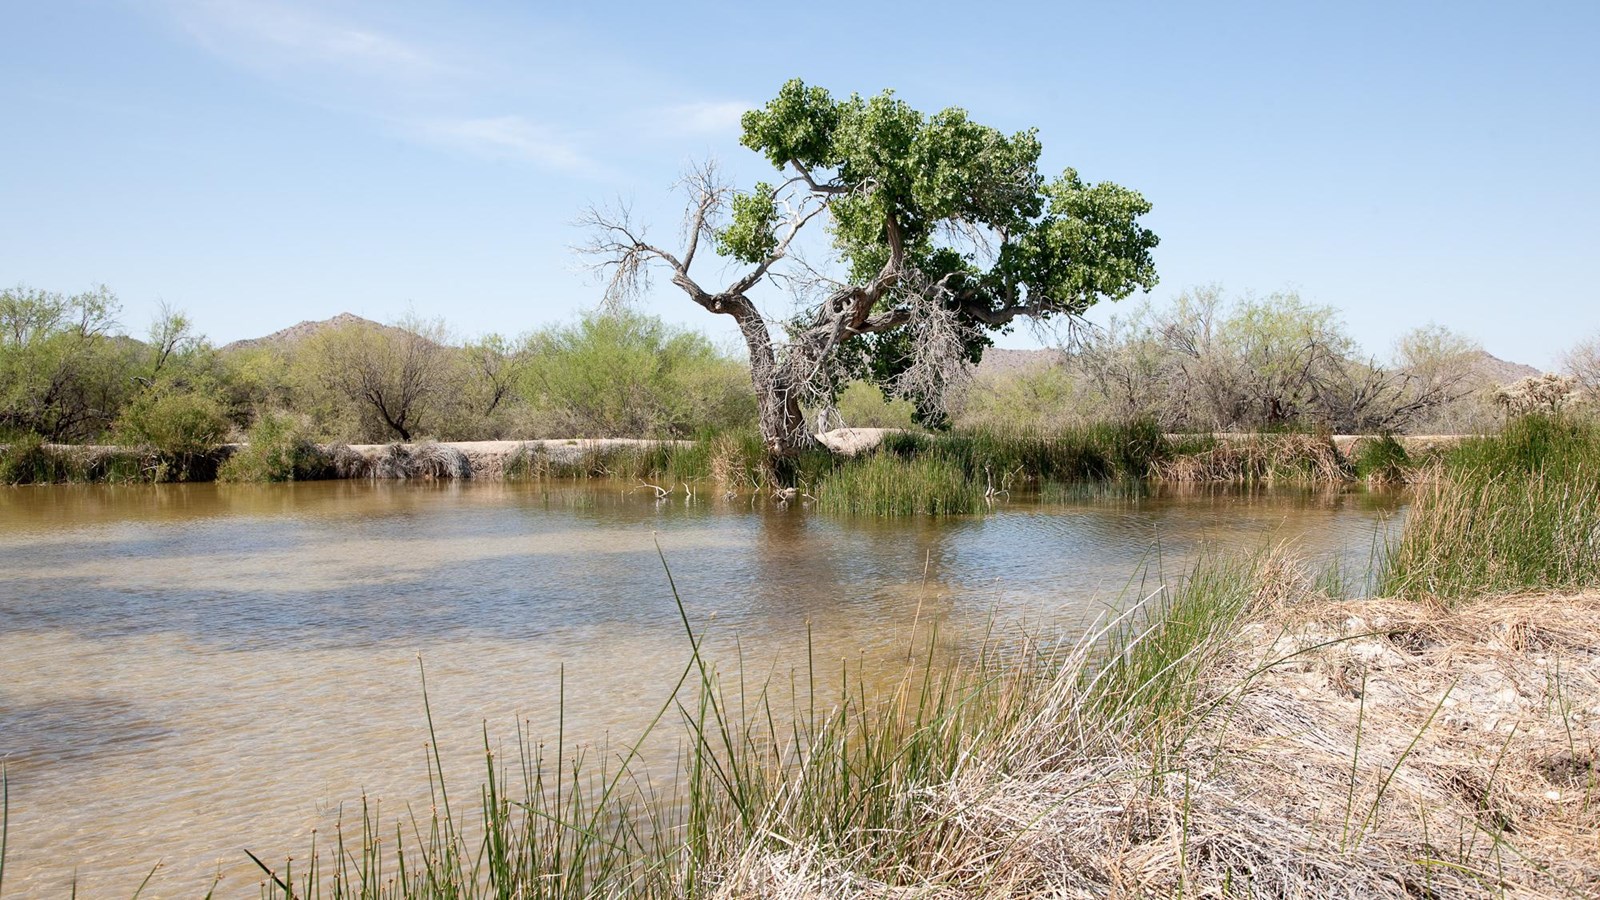 A shallow, brown pond surrounded by reeds and a large cottonwood tree.